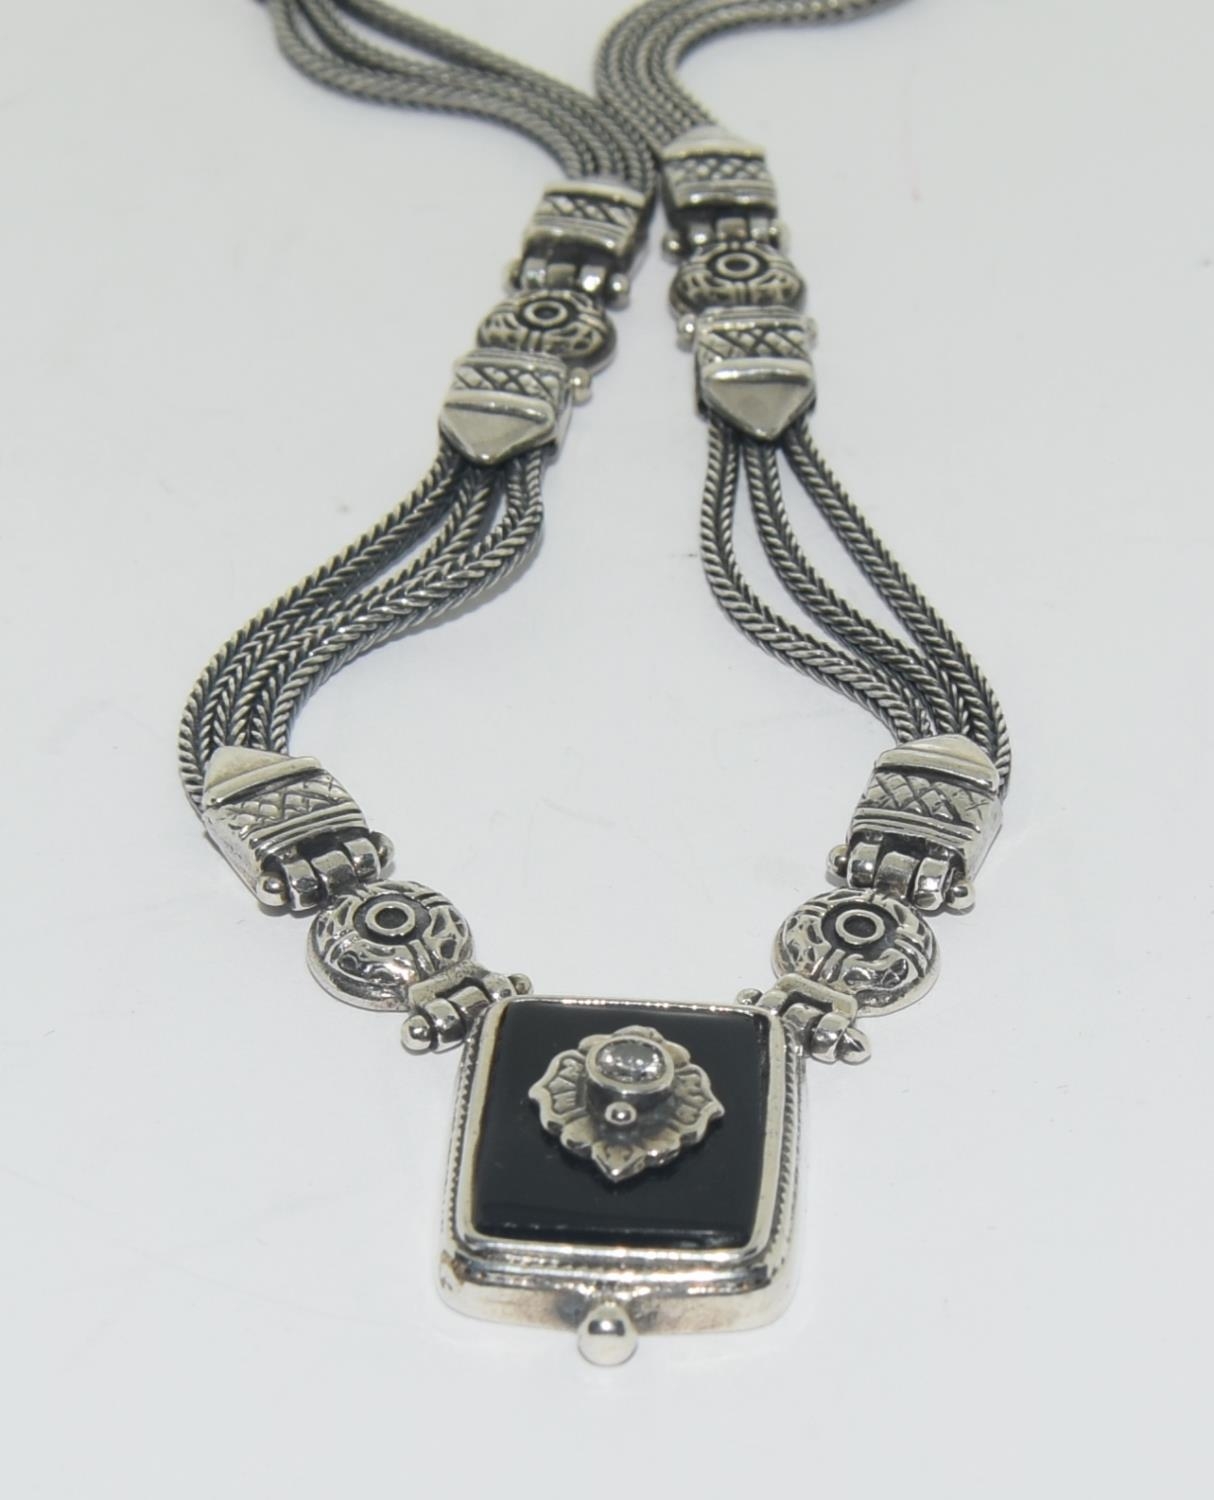 Victorian inspired black onyx 925 silver ornate necklace. - Image 2 of 3